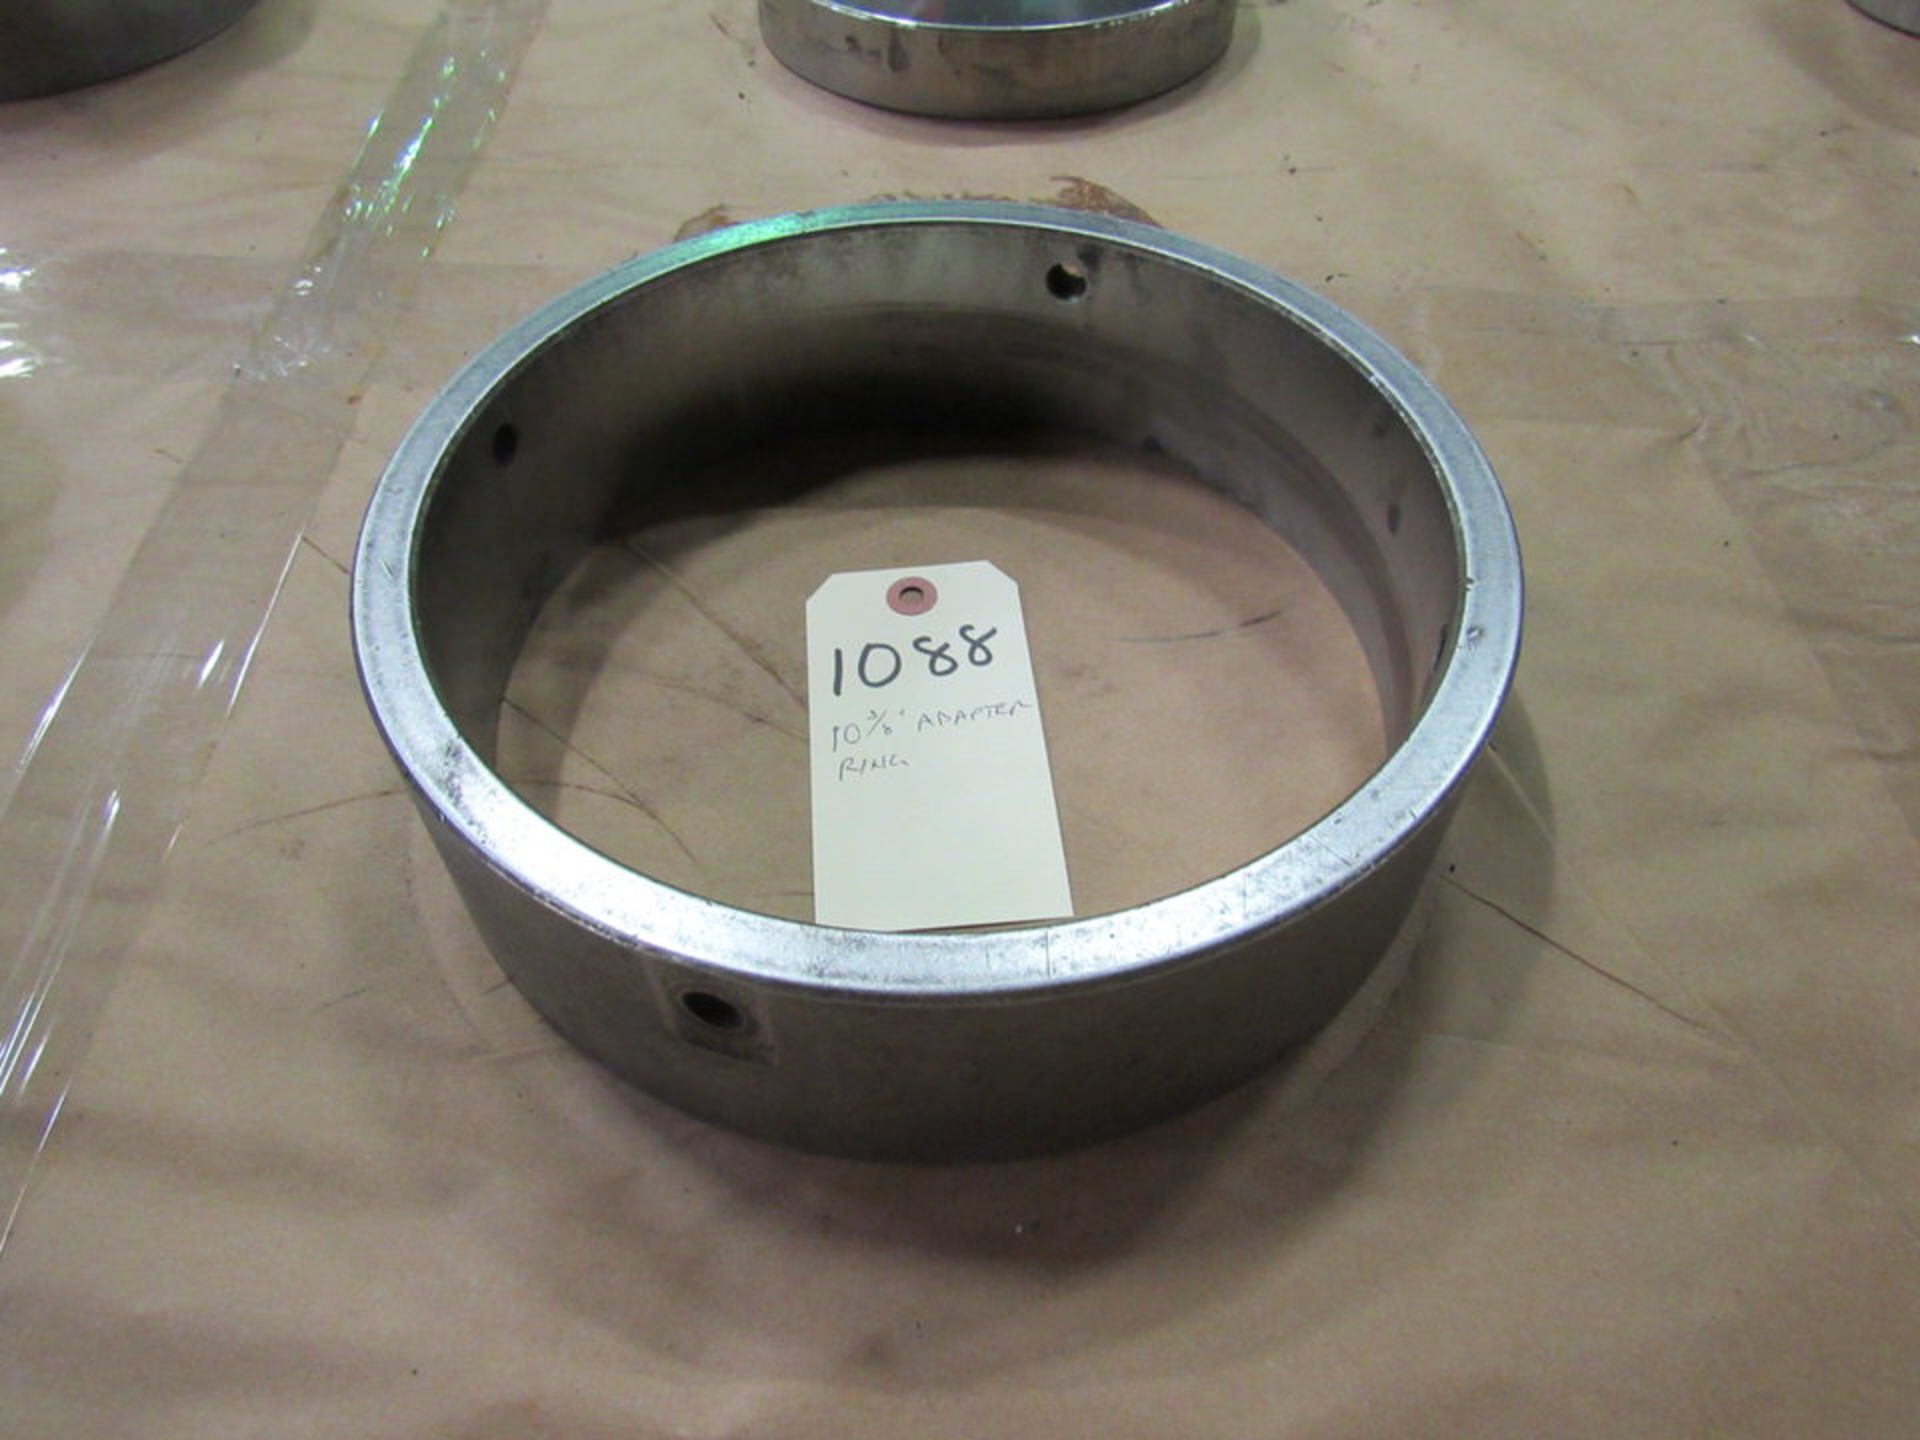 10-3/8 Adapter Ring, 9-1/4" through hole, 9/16" wall thickness, 2-3/4" height (LOCATION: 3603